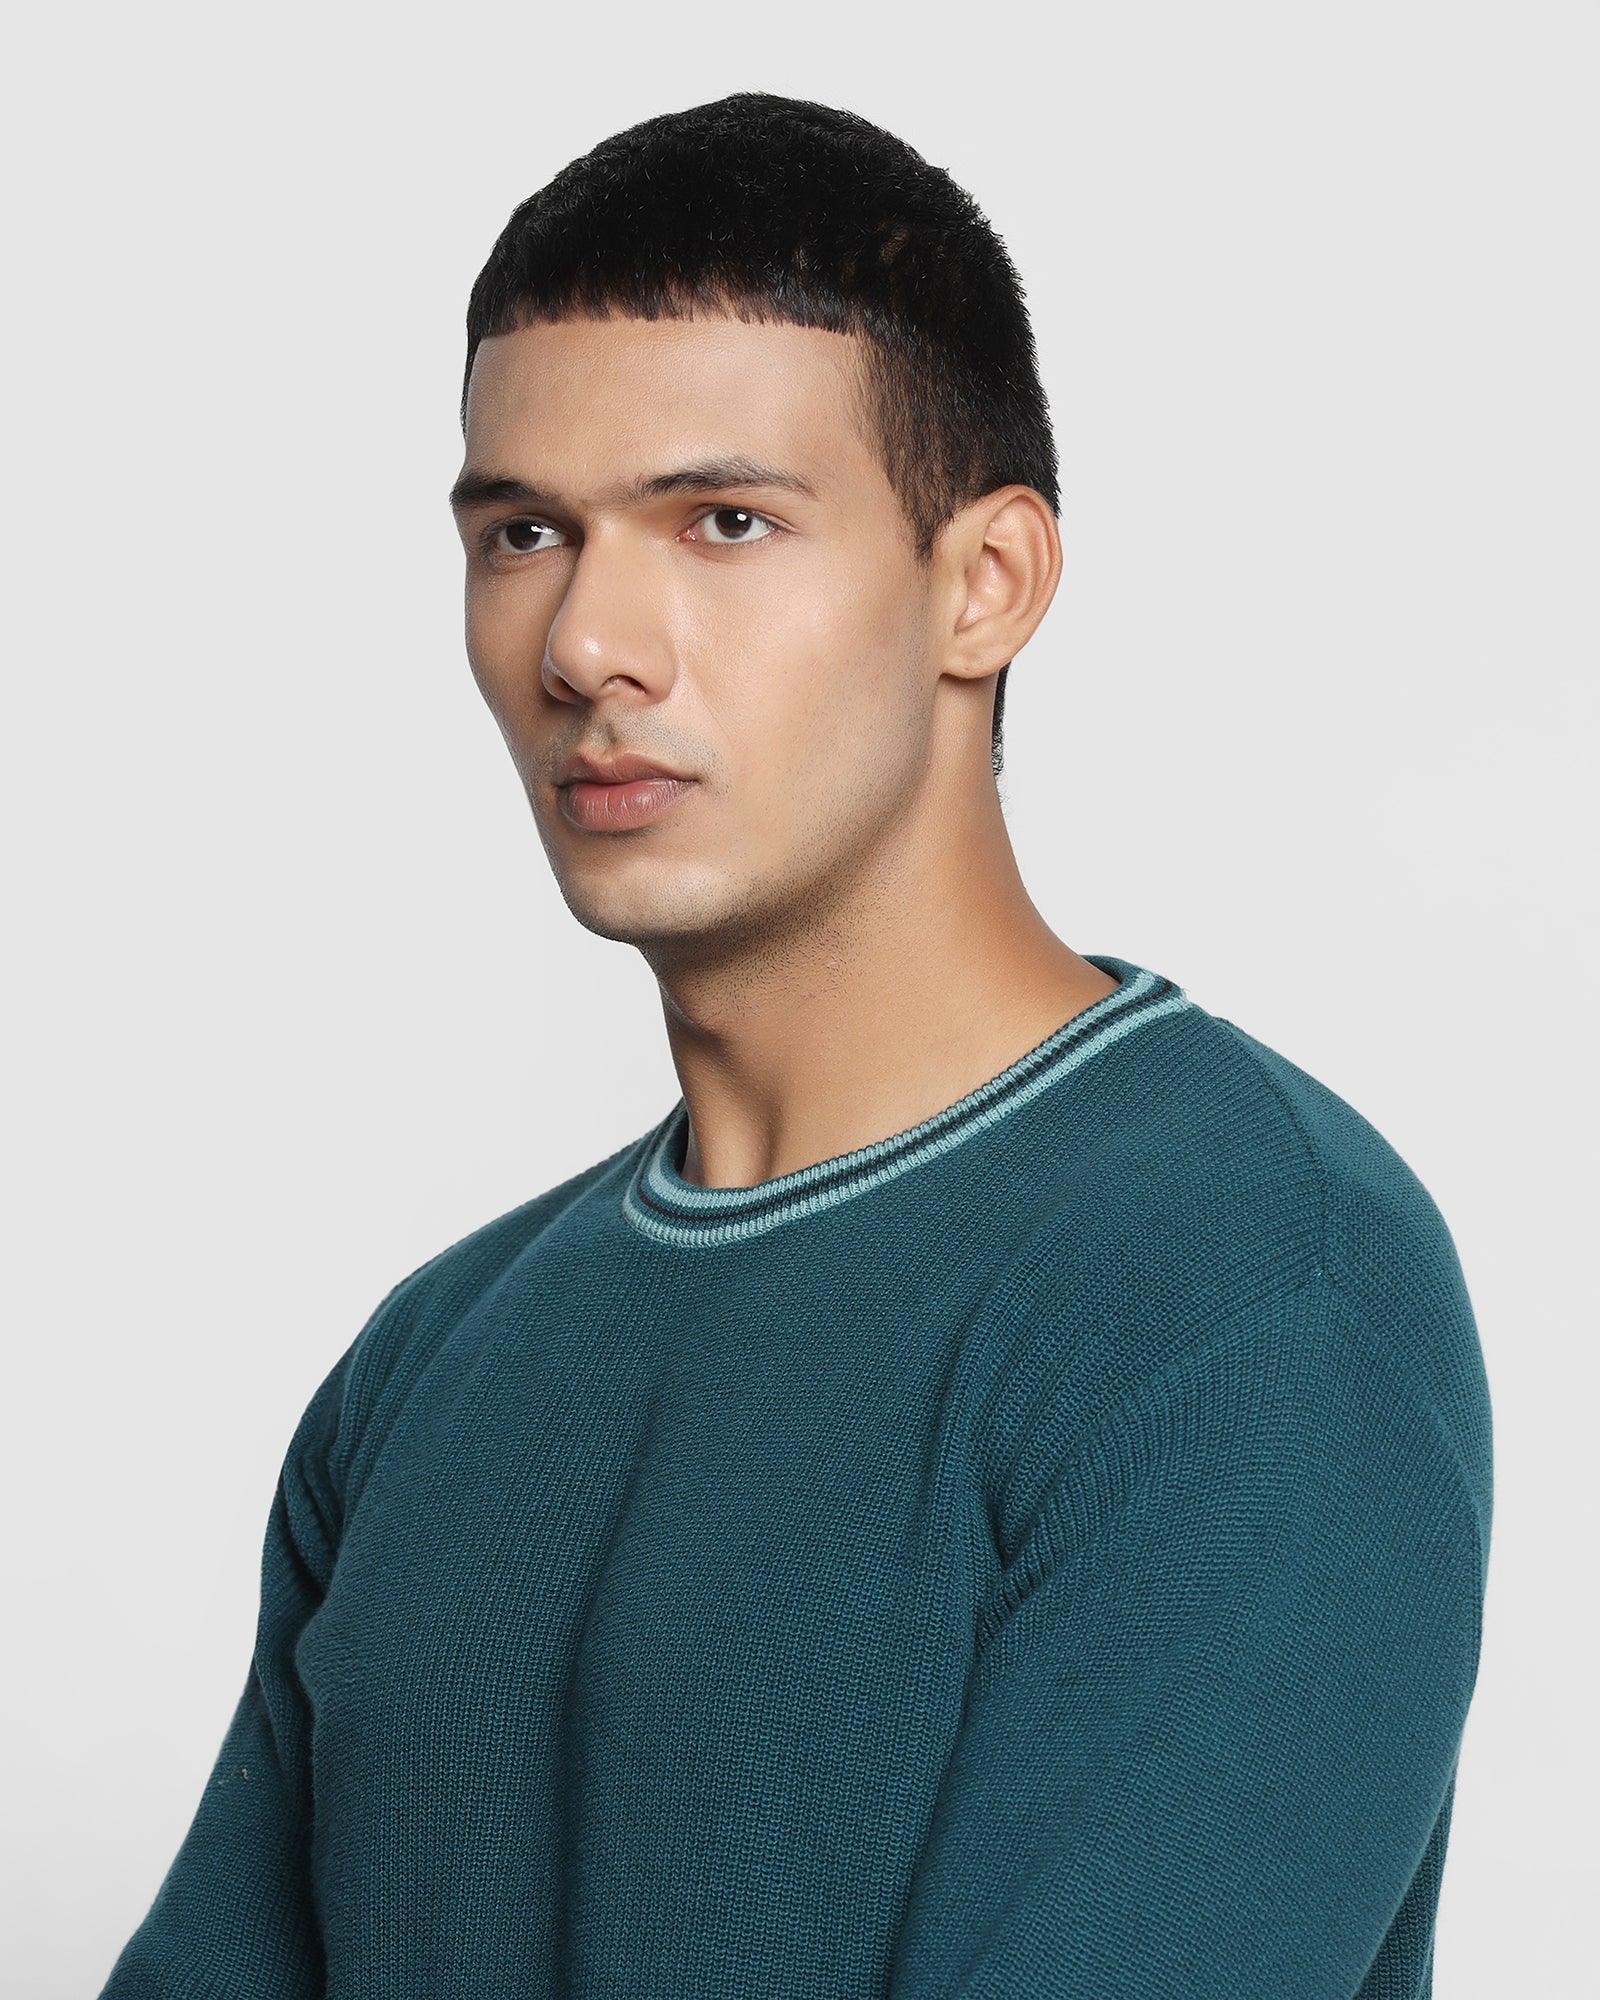 Crew Neck Teal Green Solid Sweater - Bonne